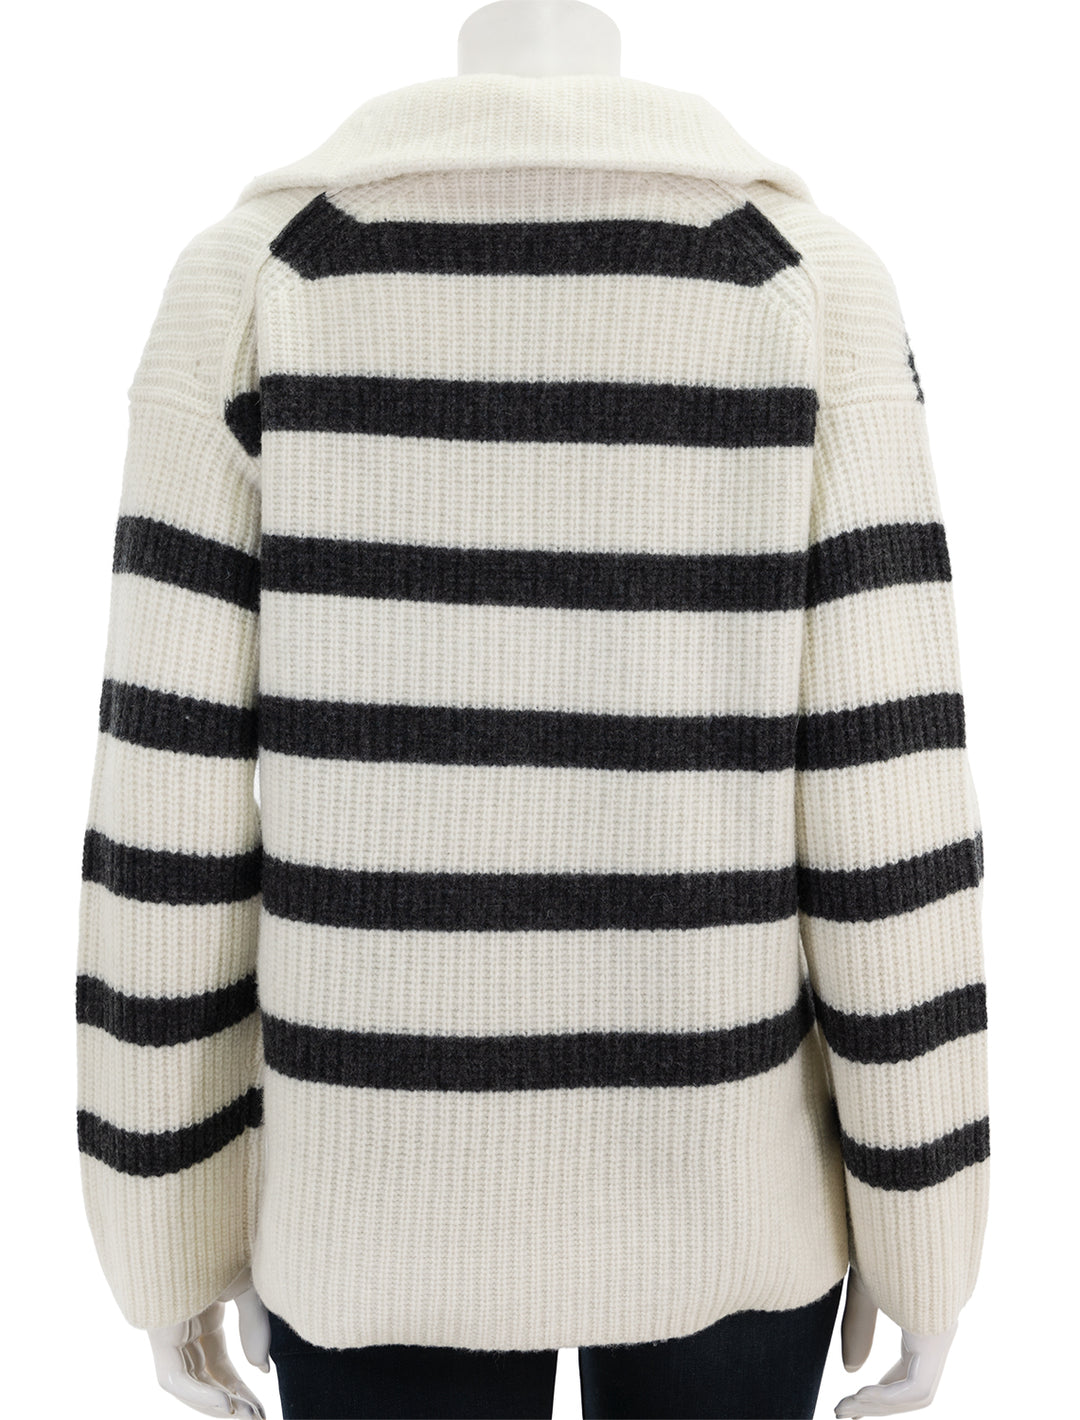 Back view of Alex Mill's felix zip merino pullover in ivory and charcoal stripe.